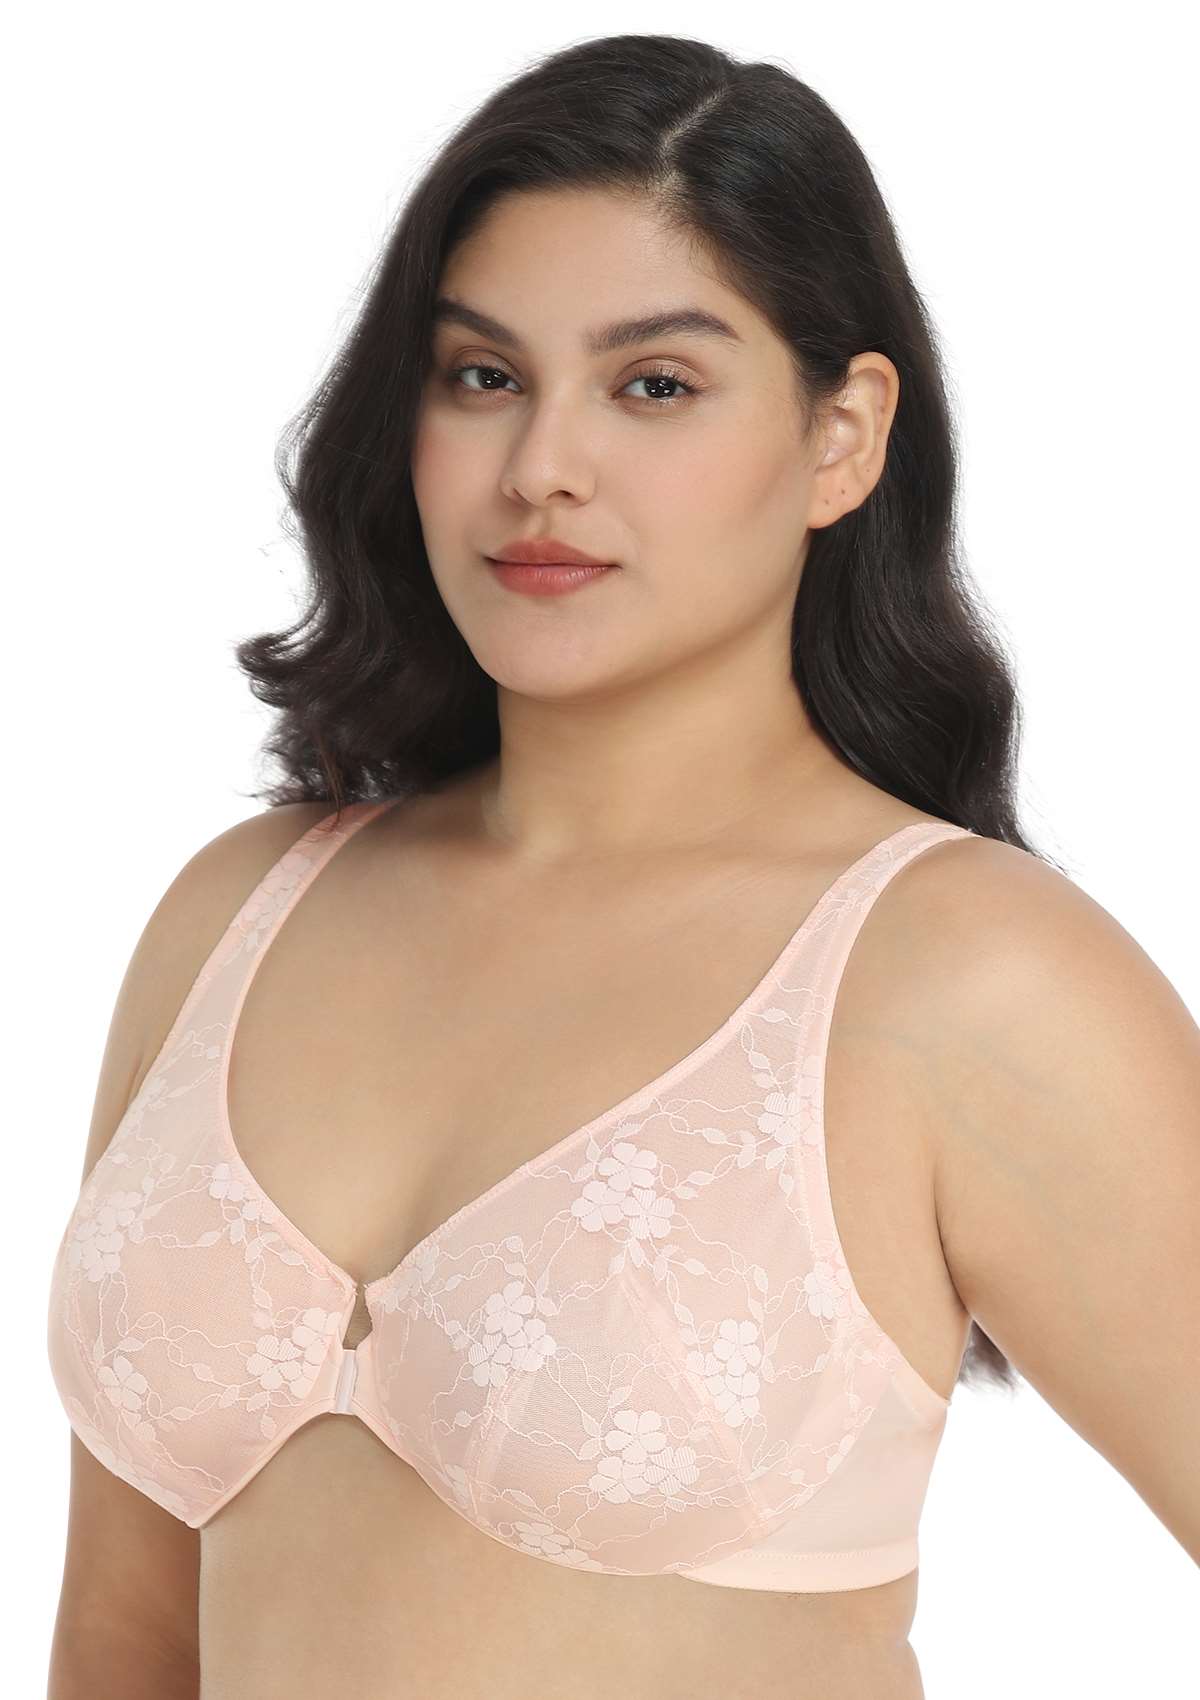 HSIA Spring Romance Front-Close Floral Lace Unlined Full Coverage Bra - White / 36 / DDD/F